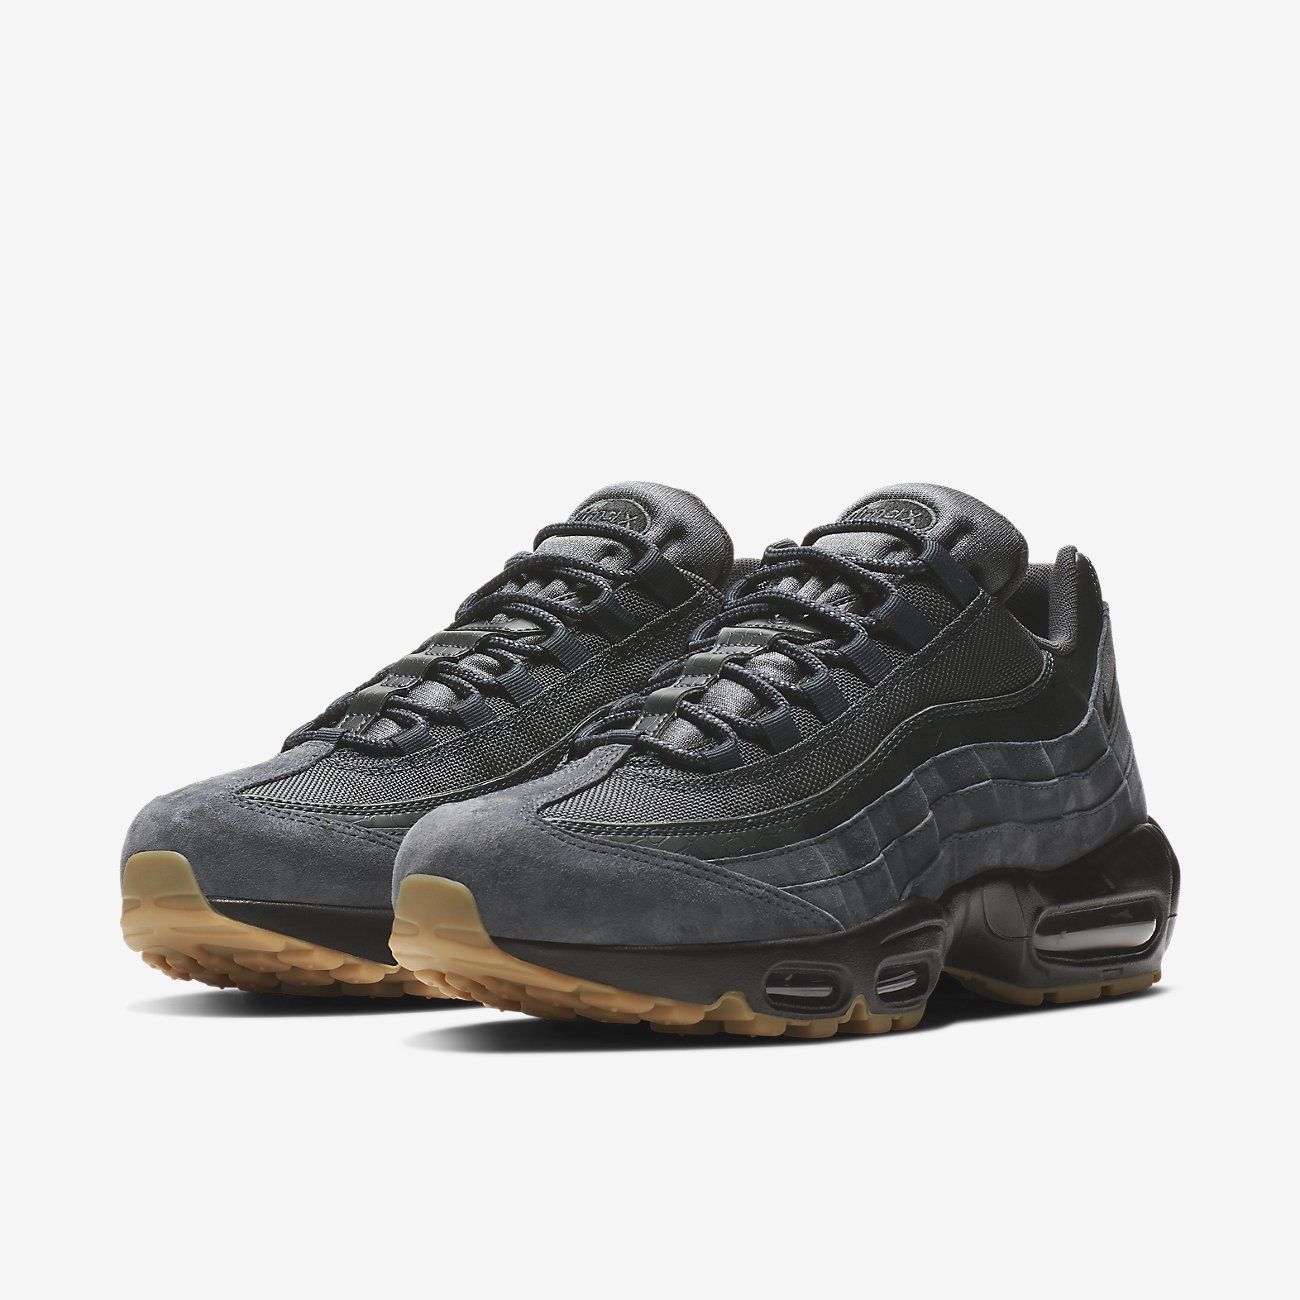 KicksFinder on Twitter: "ICYMI: The Nike Air Max 95 SE in Anthracite